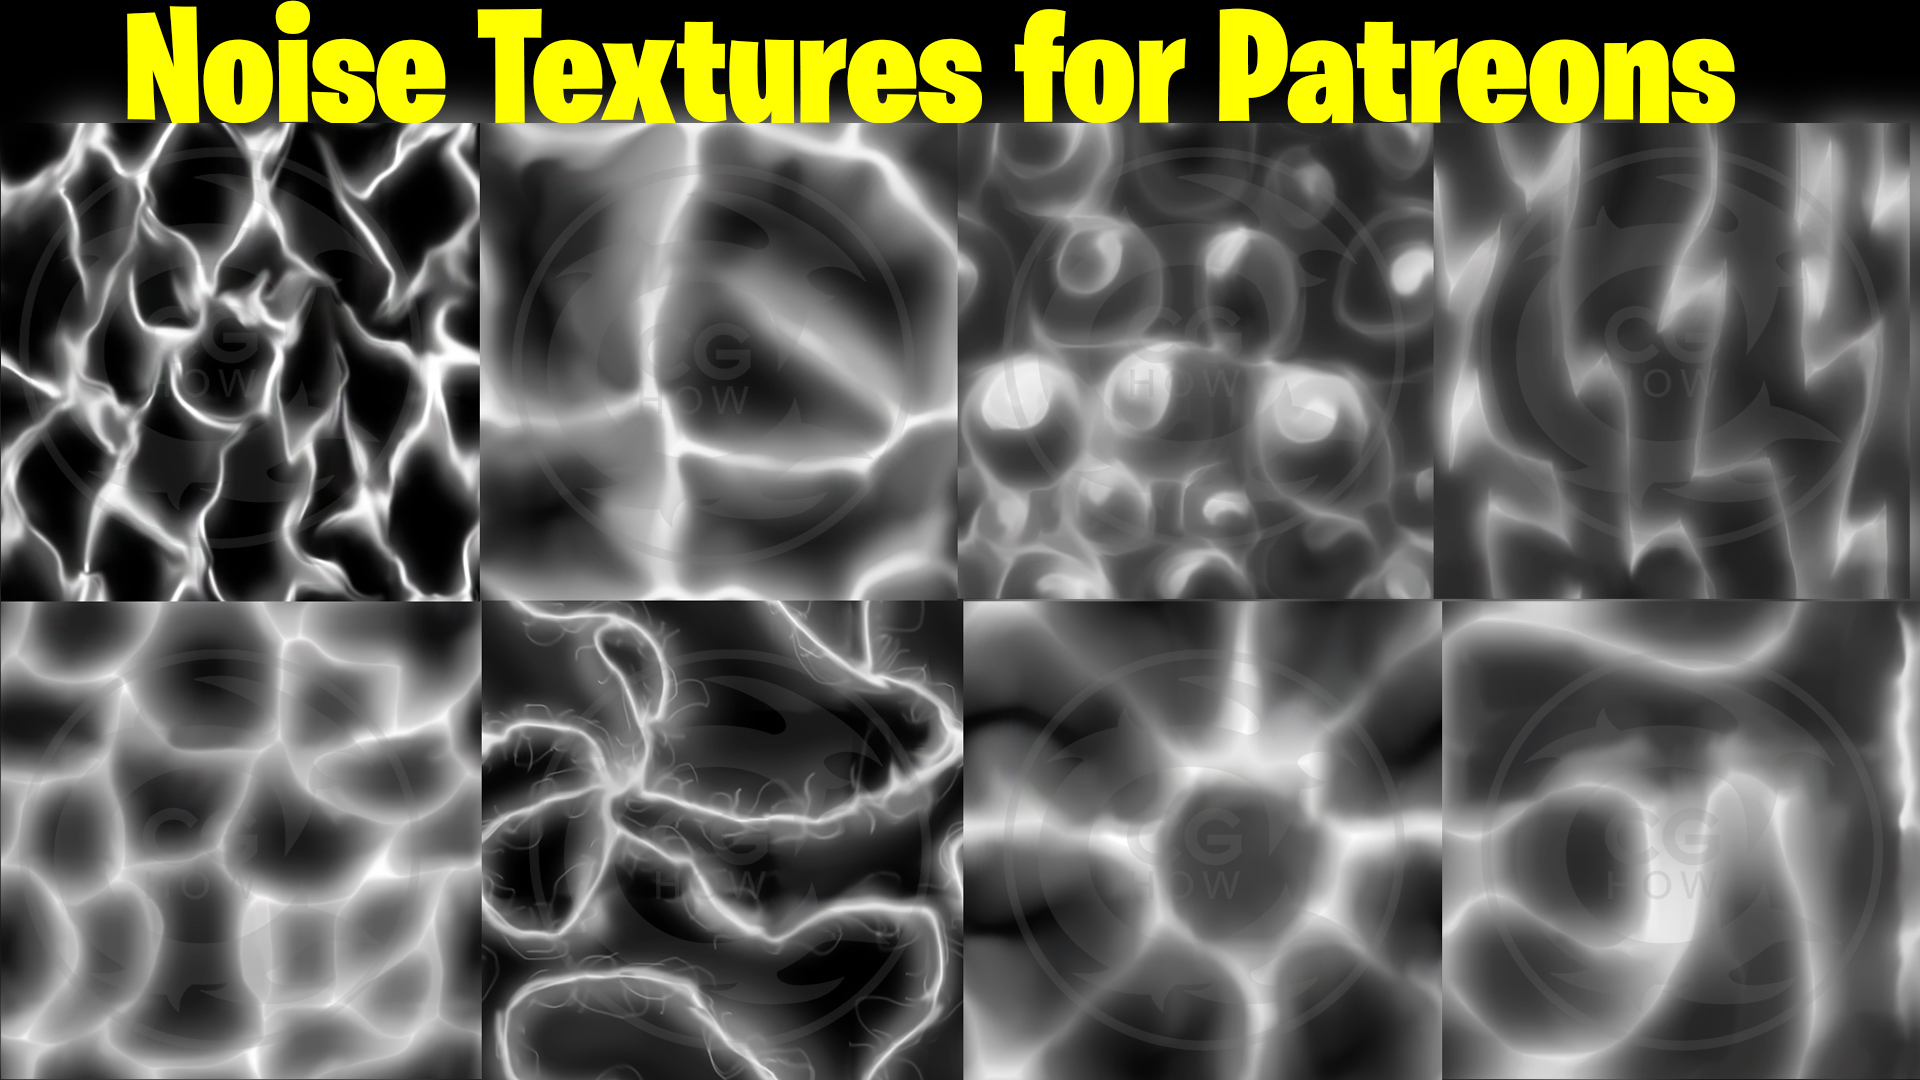 Noise Textures for Patreons